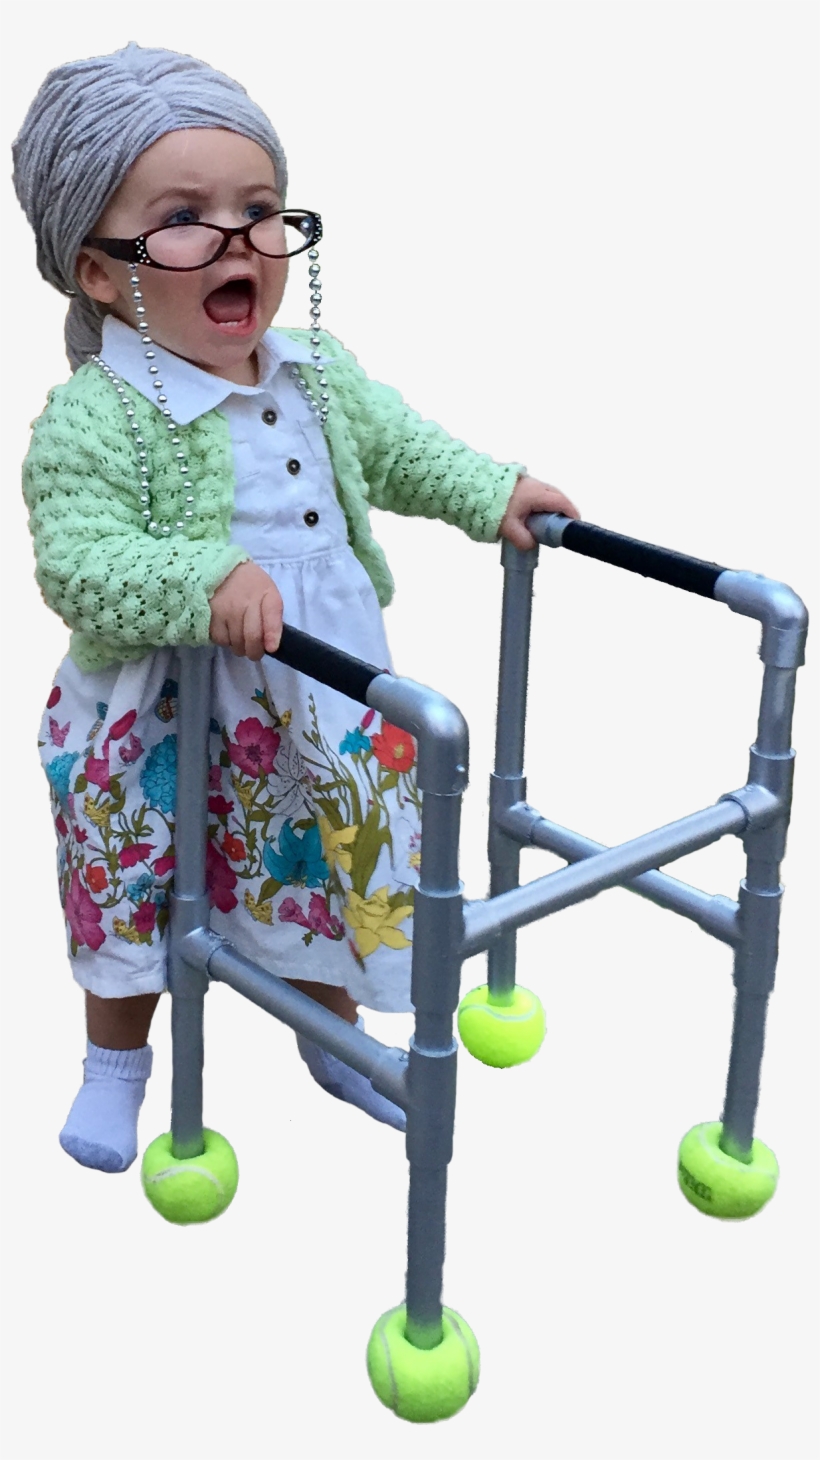 Old Lady With A Walker - Grandma With Walker Meme, transparent png #8124620